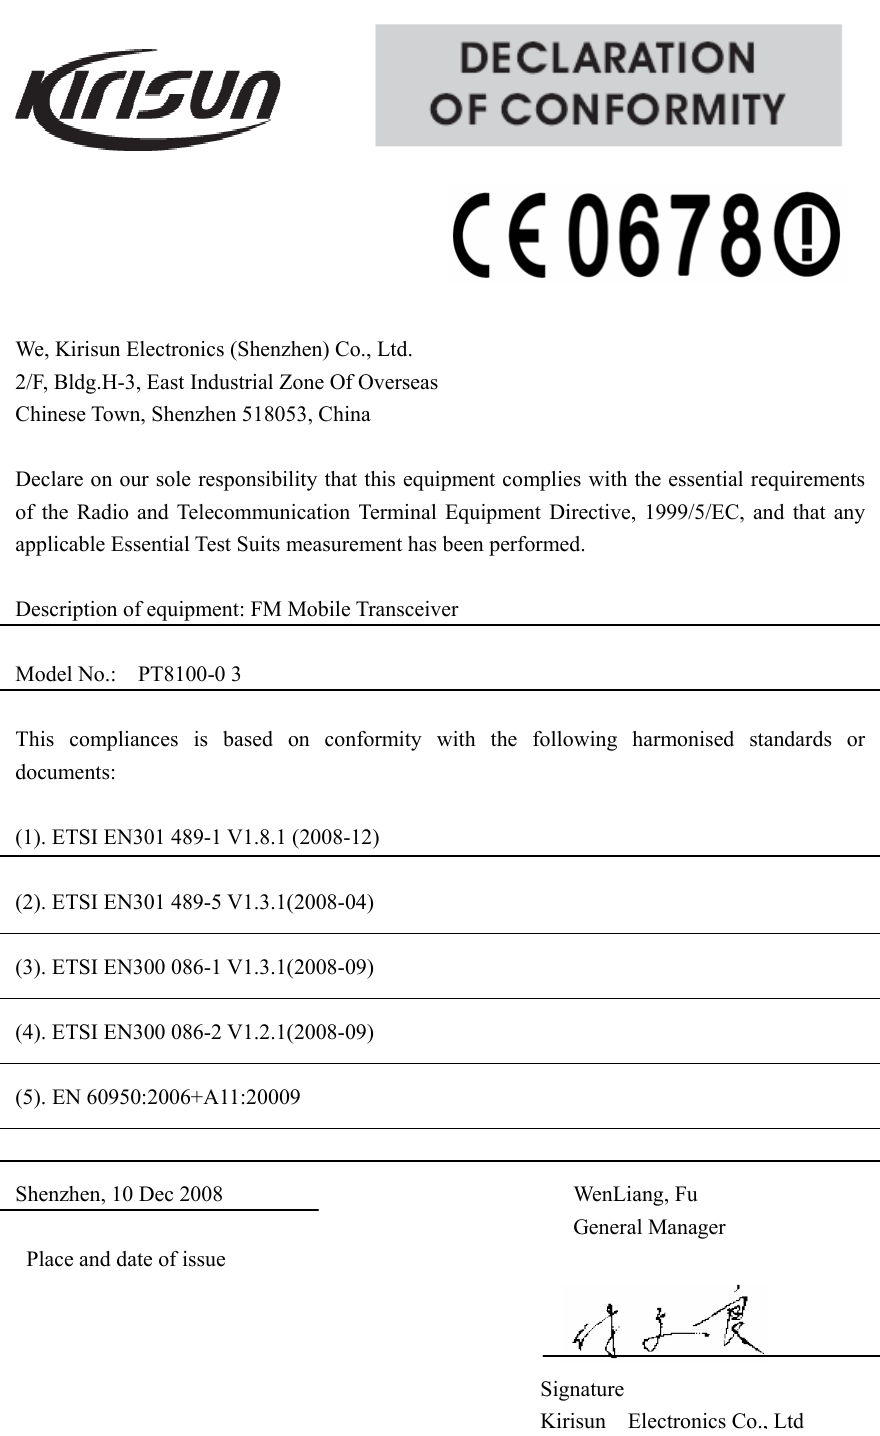                                                    We, Kirisun Electronics (Shenzhen) Co., Ltd.            2/F, Bldg.H-3, East Industrial Zone Of Overseas                 Chinese Town, Shenzhen 518053, China  Declare on our sole responsibility that this equipment complies with the essential requirements of the Radio and Telecommunication Terminal Equipment Directive, 1999/5/EC, and that any applicable Essential Test Suits measurement has been performed.  Description of equipment: FM Mobile Transceiver  Model No.:  PT8100-03                                                            This compliances is based on conformity with the following harmonised standards or documents:  (1). ETSI EN301 489-1 V1.8.1 (2008-12)  (2). ETSI EN301 489-5 V1.3.1(2008-04)  (3). ETSI EN300 086-1 V1.3.1(2008-09)  (4). ETSI EN300 086-2 V1.2.1(2008-09)  (5). EN 60950:2006+A11:20009   Shenzhen, 10 Dec 2008                                WenLiang, Fu General Manager Place and date of issue             Signature Kirisun Electronics Co., Ltd